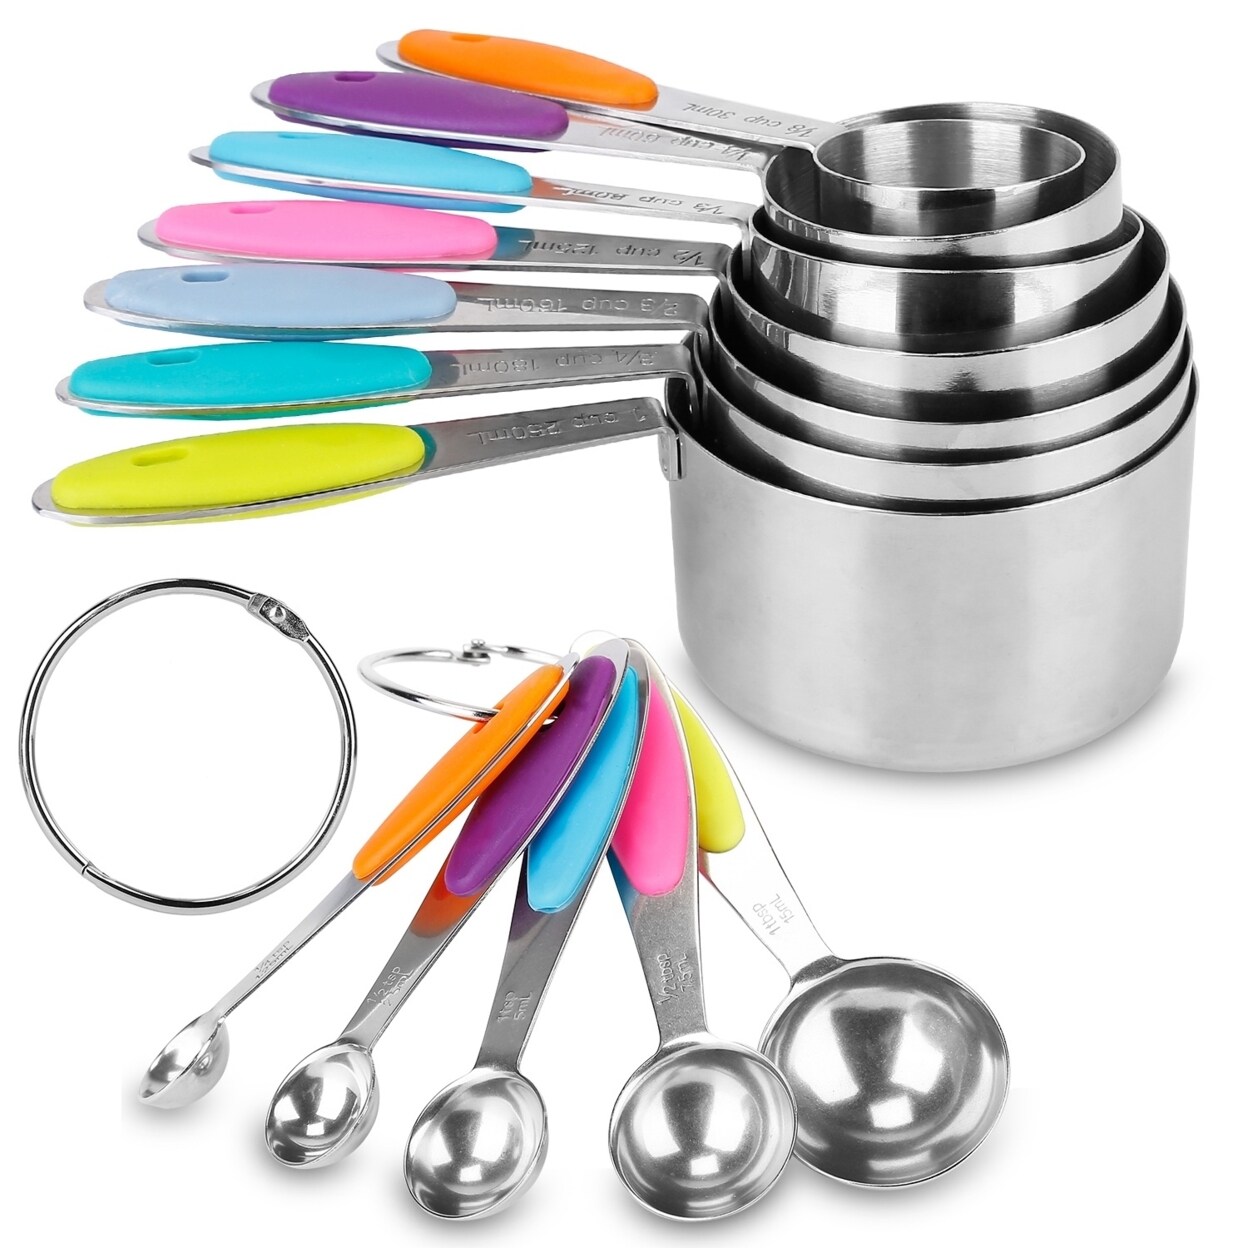 12 Pcs Stainless Steel Measuring Cups Spoons Set Kitchen Measuring Tools  For Cooking Baking